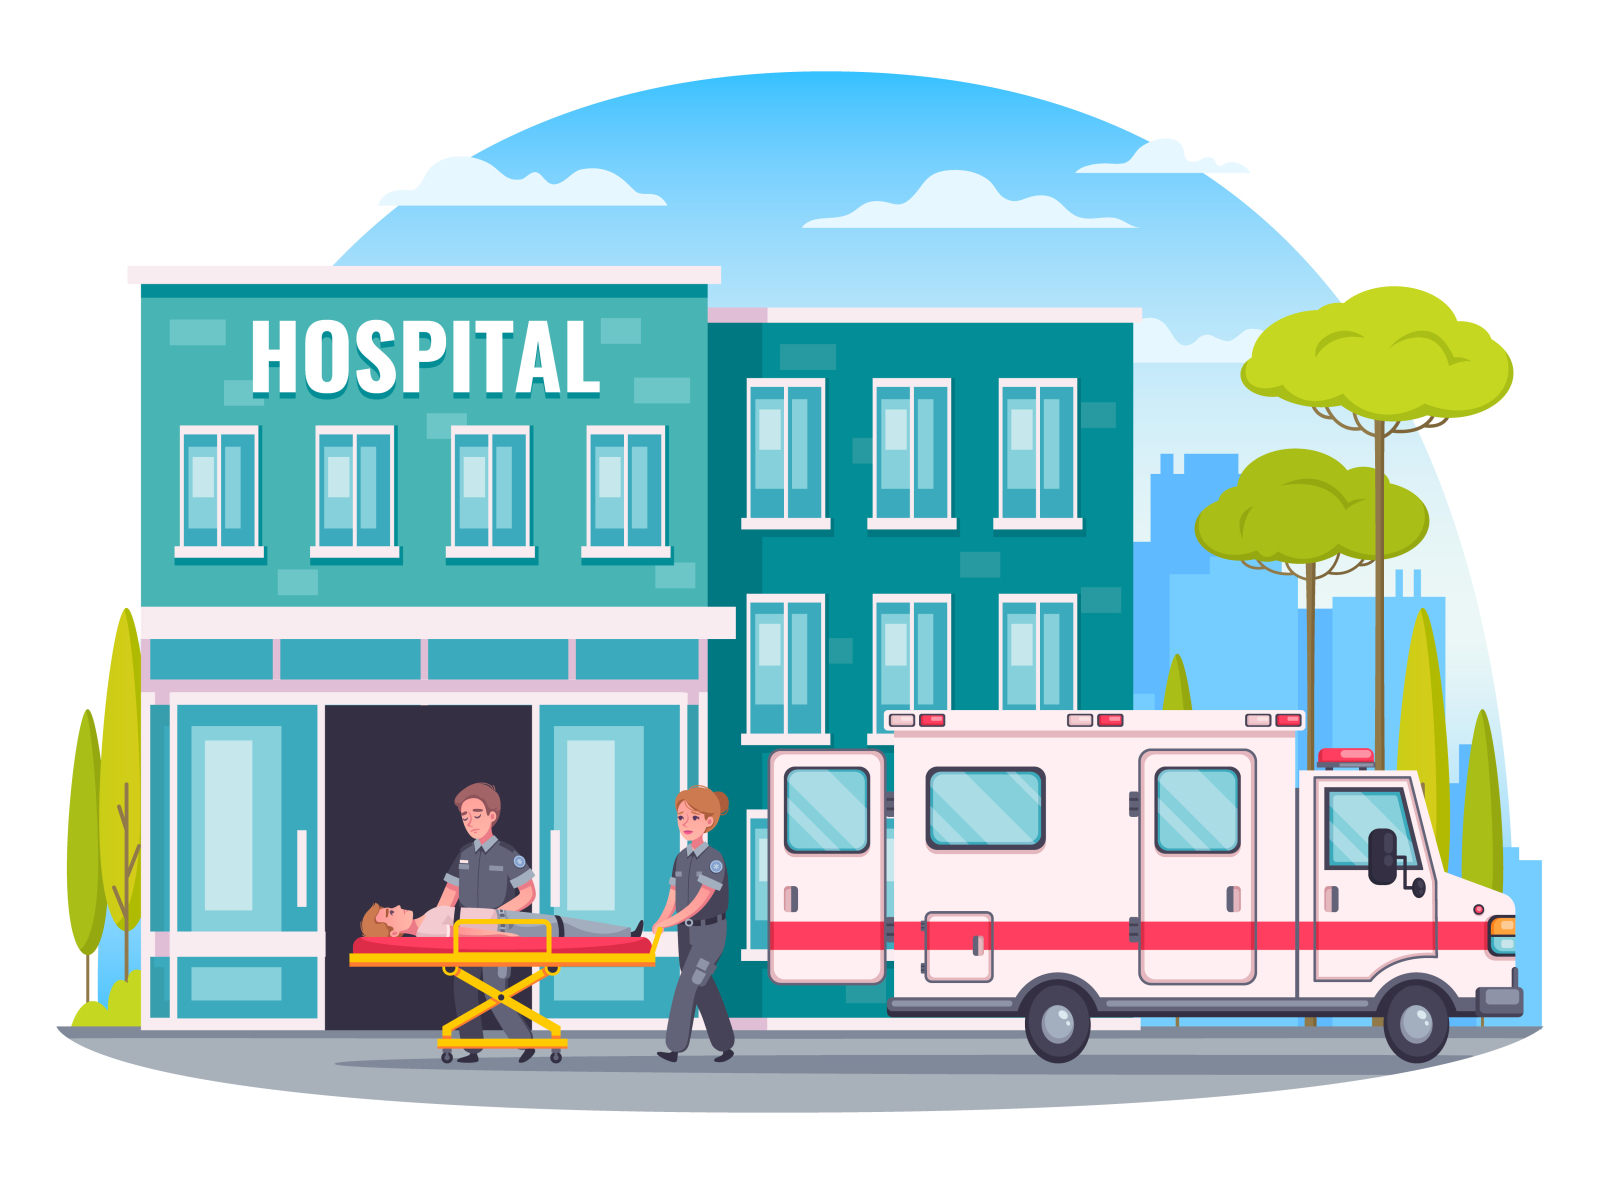 Paramedic emergency ambulance by Macrovector on Dribbble